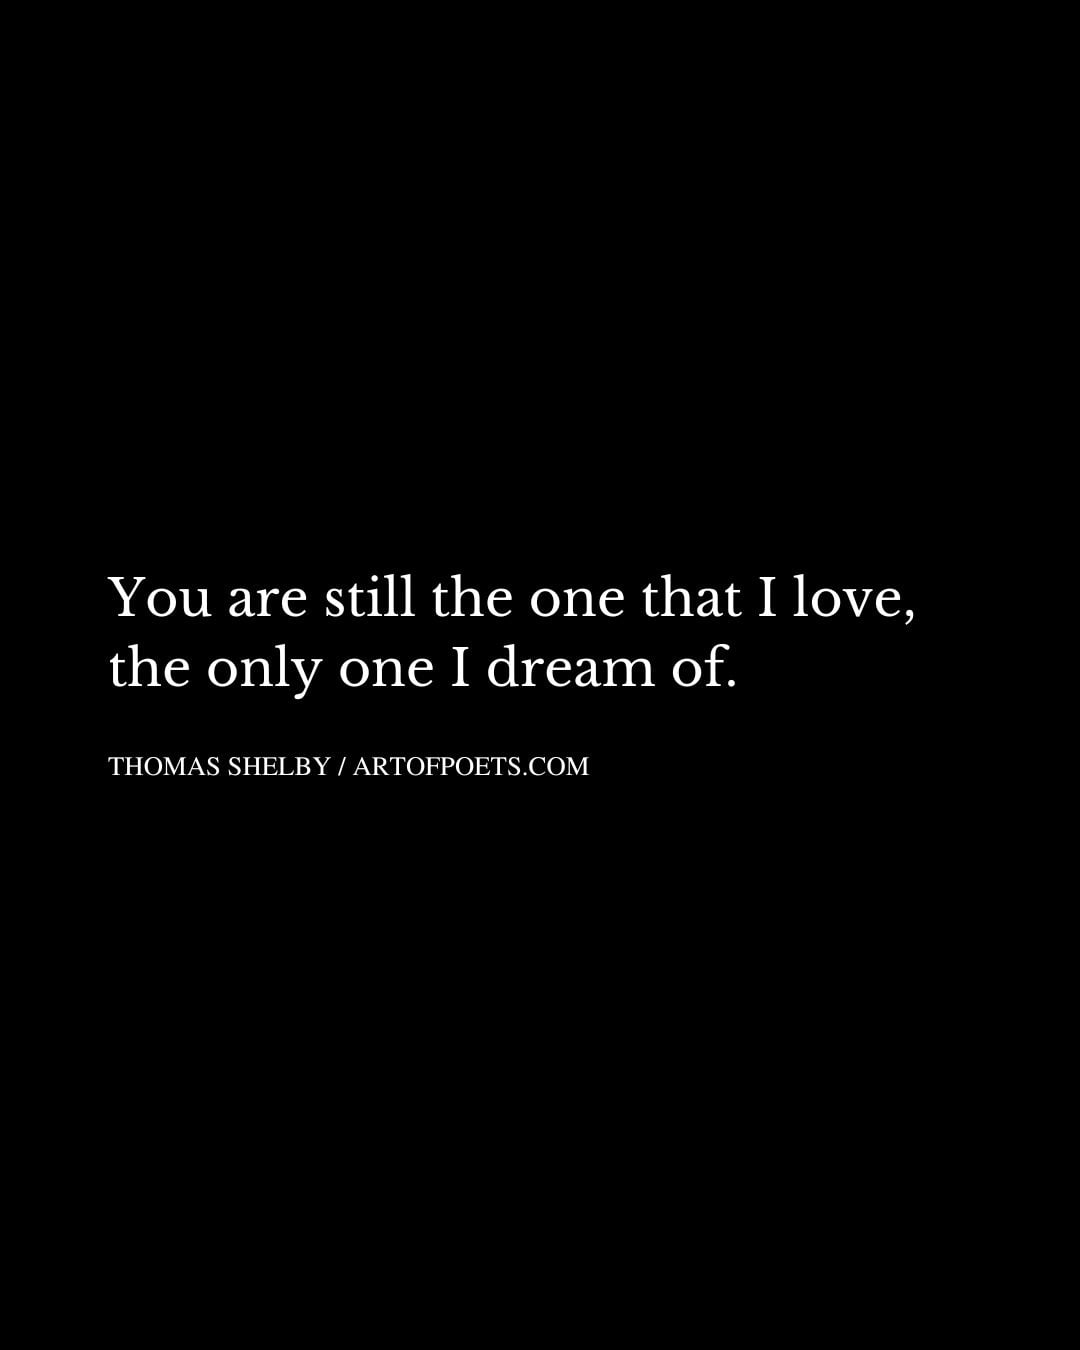 You are still the one that I love the only one I dream of